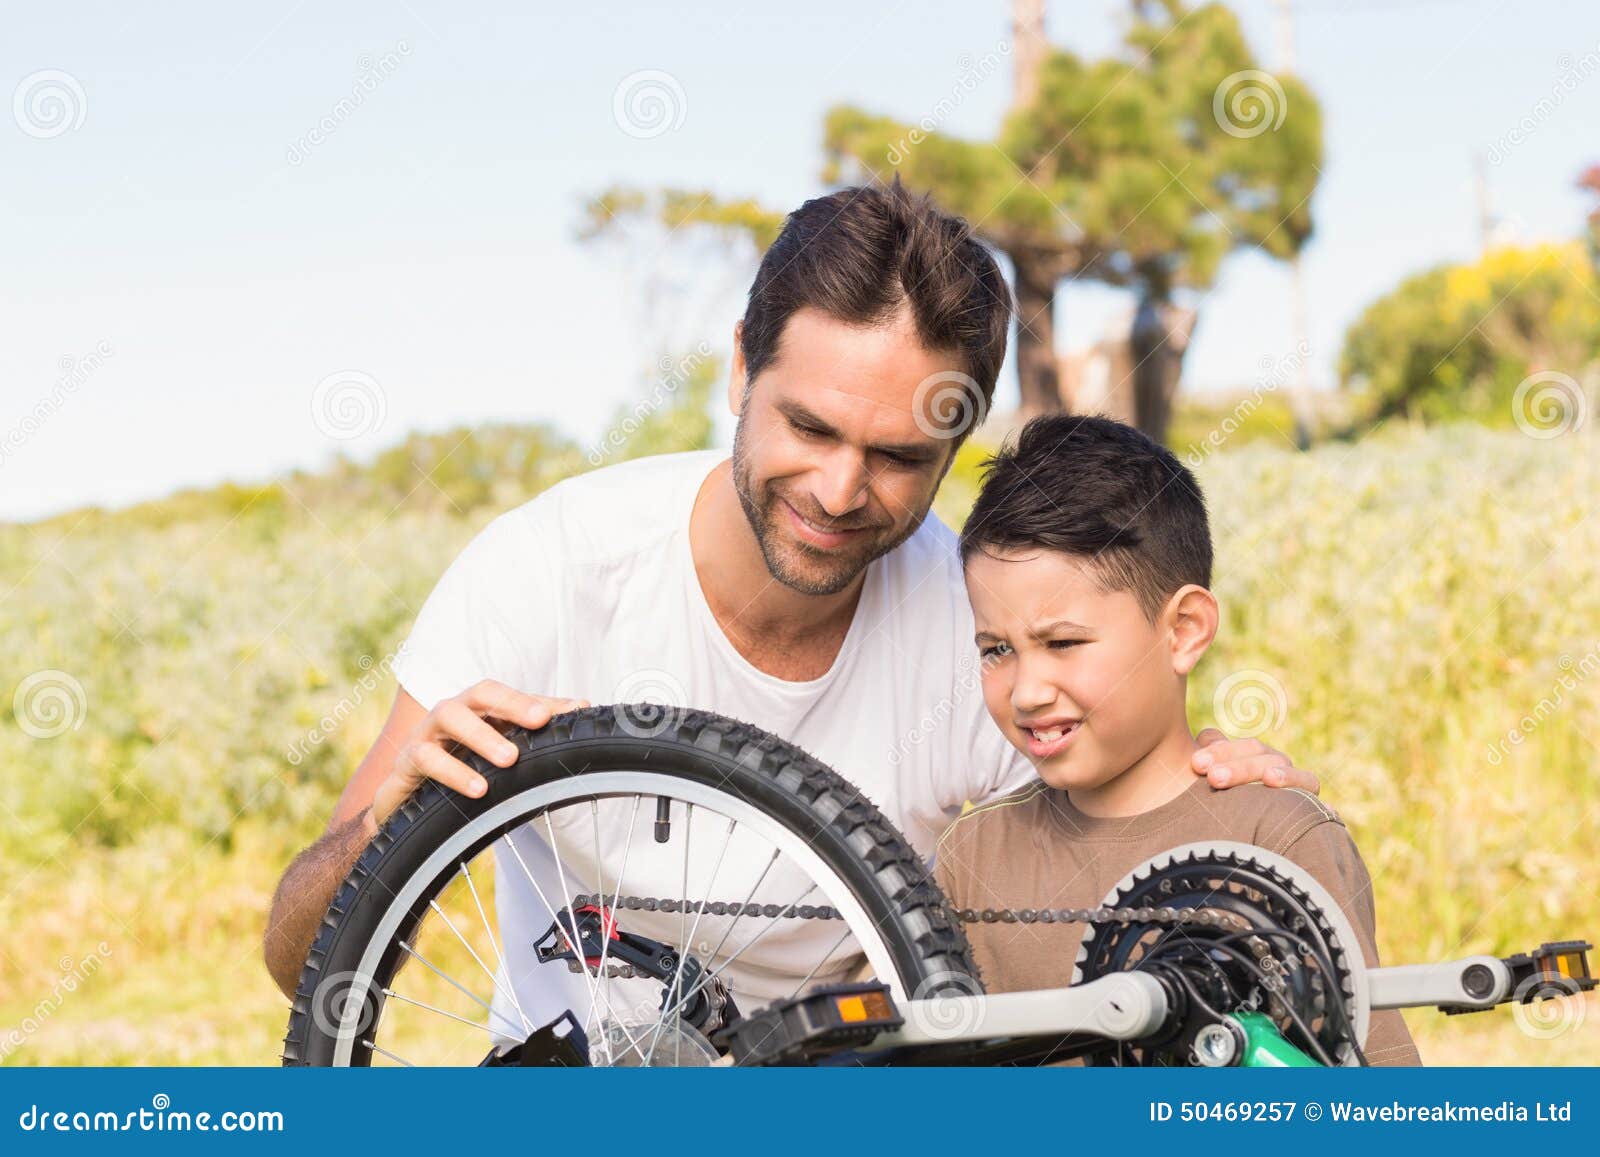 Father and son repairing bike together on a sunny day